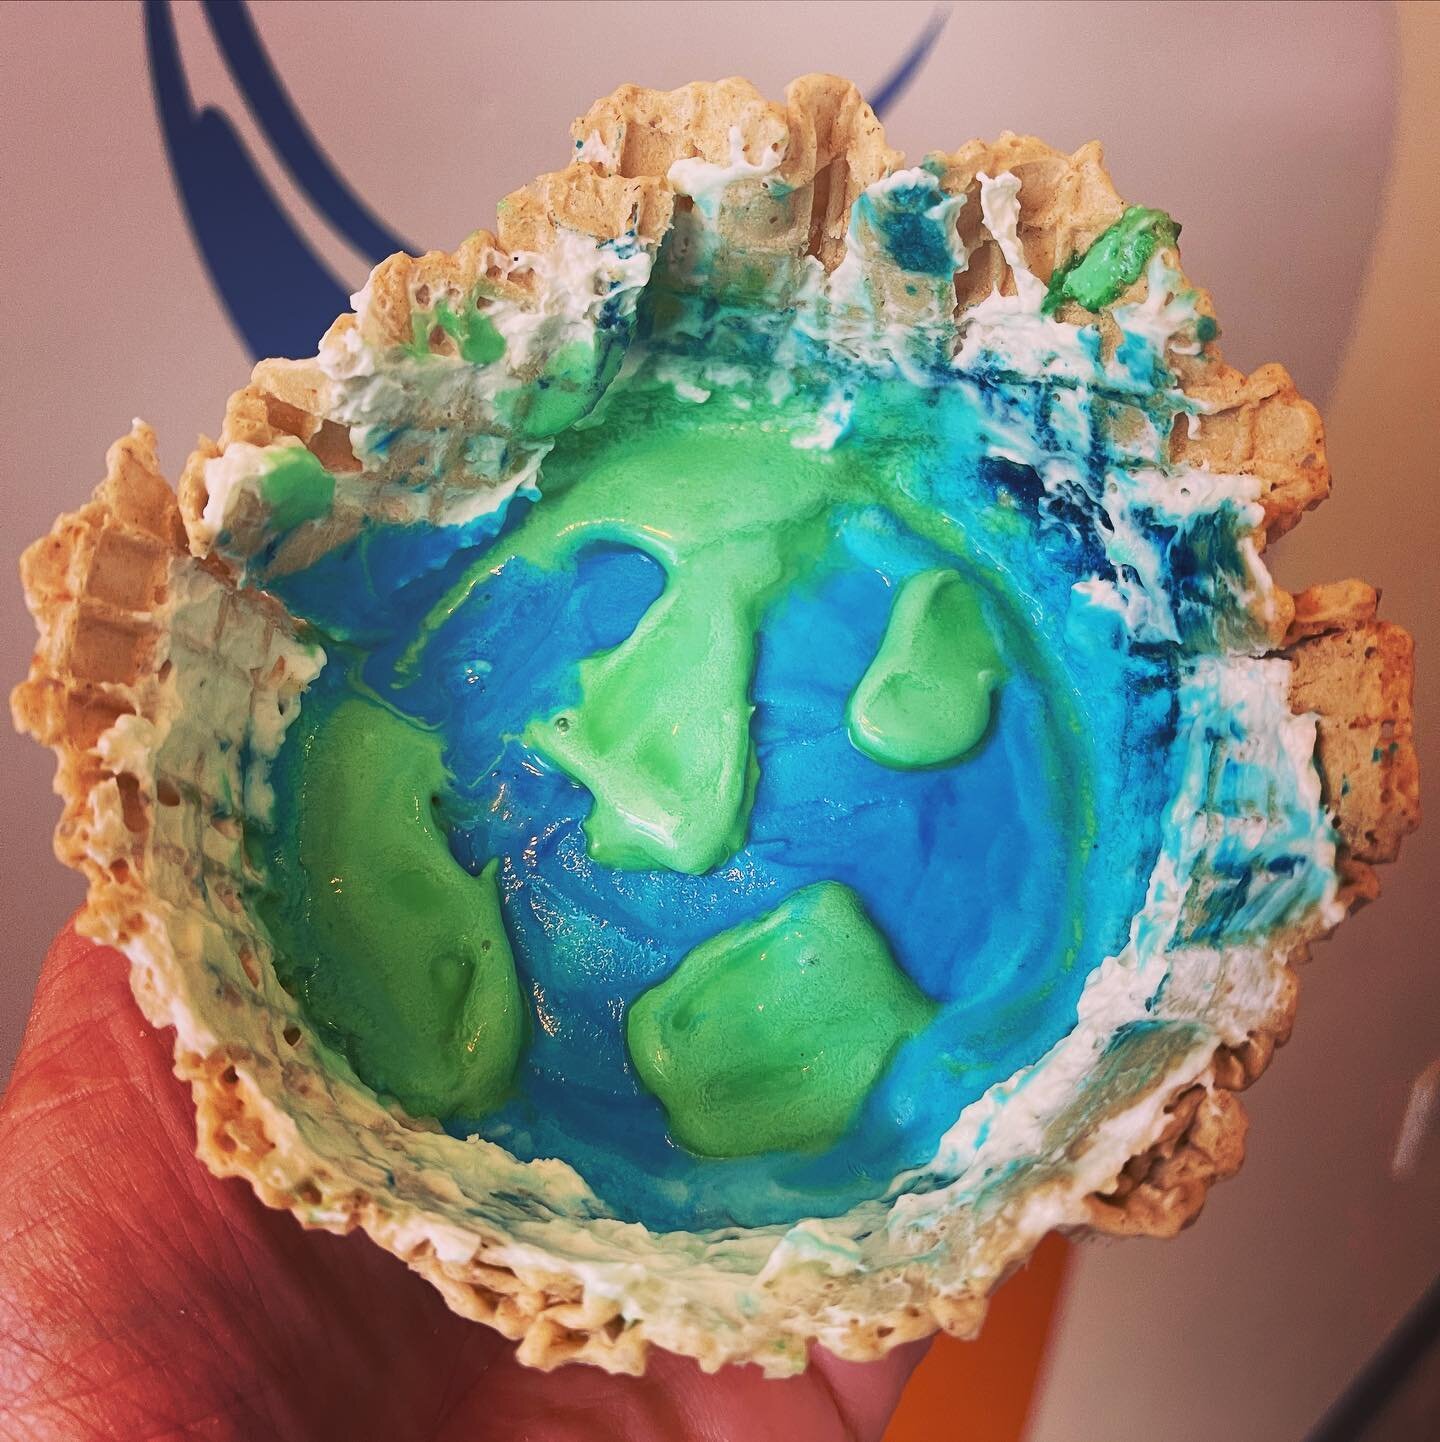 Every day is Earth Day at North Park Creamery. Certified Organic ice cream and coffee 🍦☕️🌎 Better for you and the planet. Earth in our vegan gluten free waffle bowl by Izzy.

#icecream #dessert #sdfoodie #sdeats #sdfoodscene #northparksd #familyown